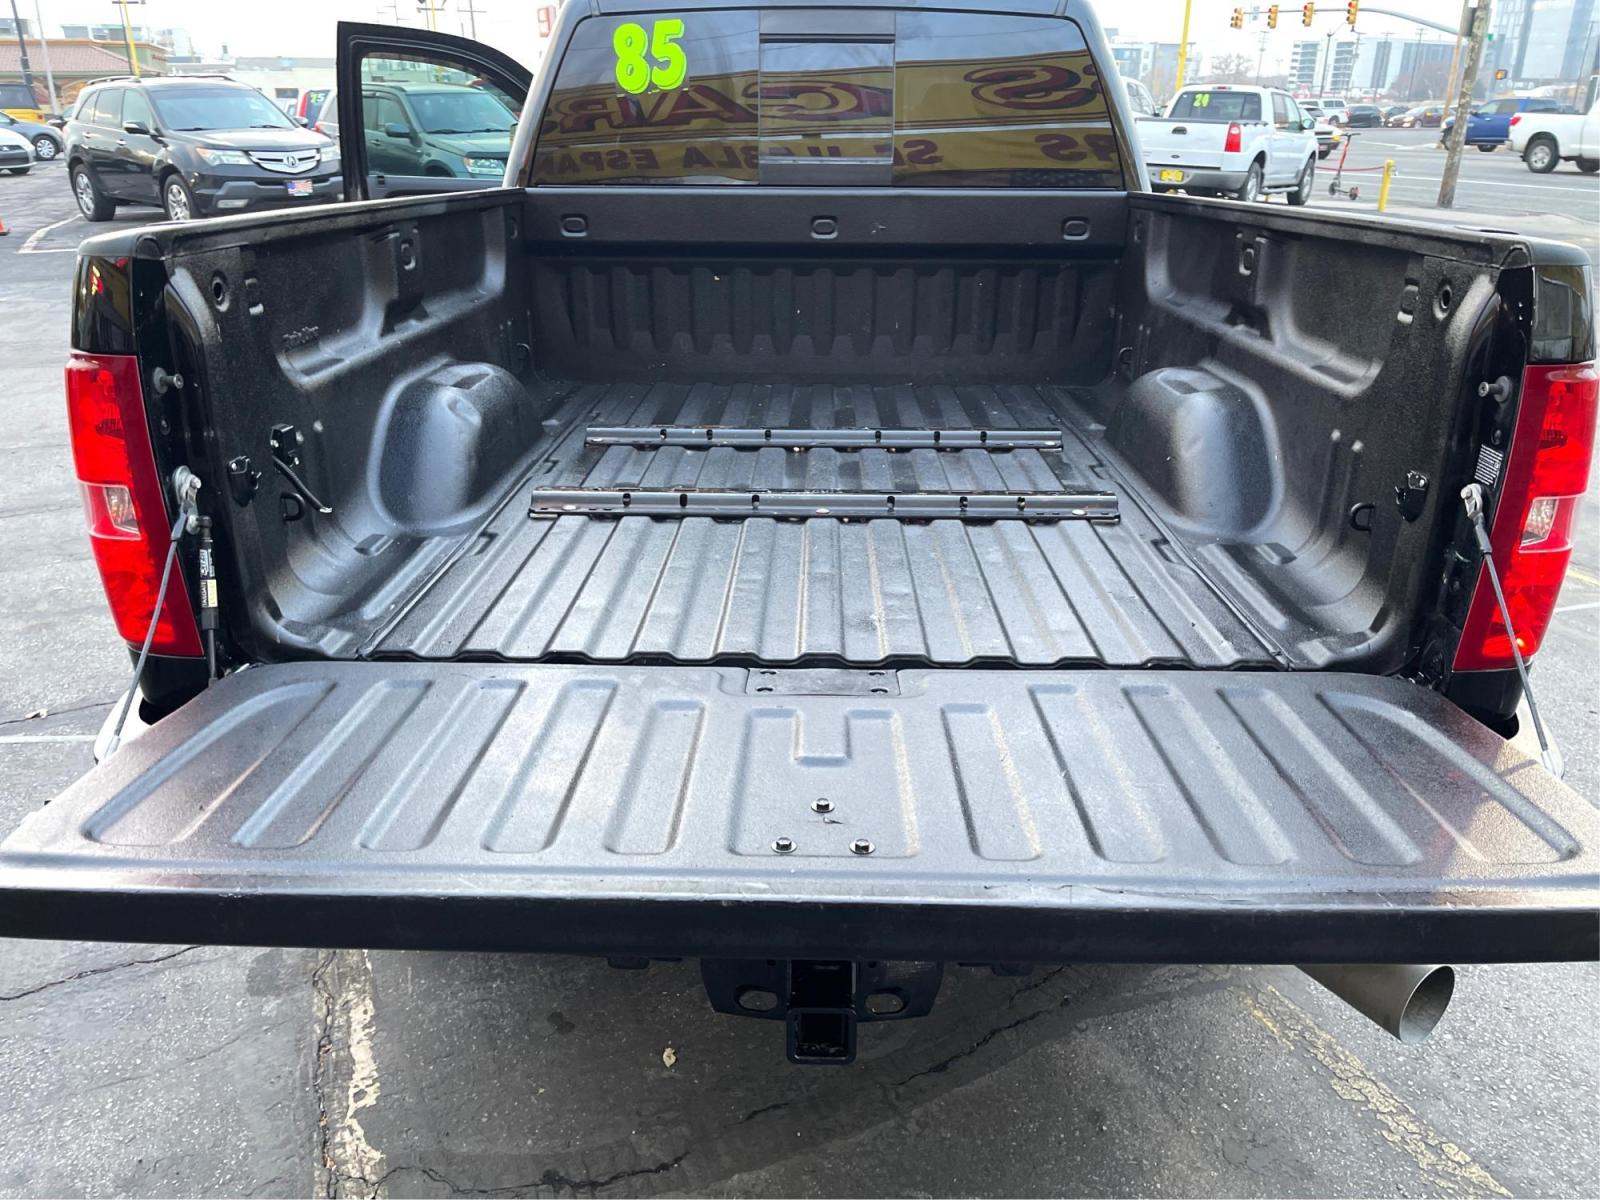 2012 Black /Black Chevrolet Silverado 3500HD (1GC4K1E81CF) , Allison Transmission transmission, located at 801 South State Street, Salt Lake City, UT, 84111, (801) 328-0098, 40.751953, -111.888206 - 3500HD LTZ DURAMAX DIESEL 6.6L, Loaded with features, 4x4, ALLISON TRANSMISSION, GREAT TIRES, BED LINER, LEATHER SEATS, BACKUP CAMERA, POWER SEATS, POWER LOCKS, POWER WINDOWS, Parking Sensors, AM/FM Aux input, Blutooth, GPS Navigation system, Rear Entertainment system, - Photo #12